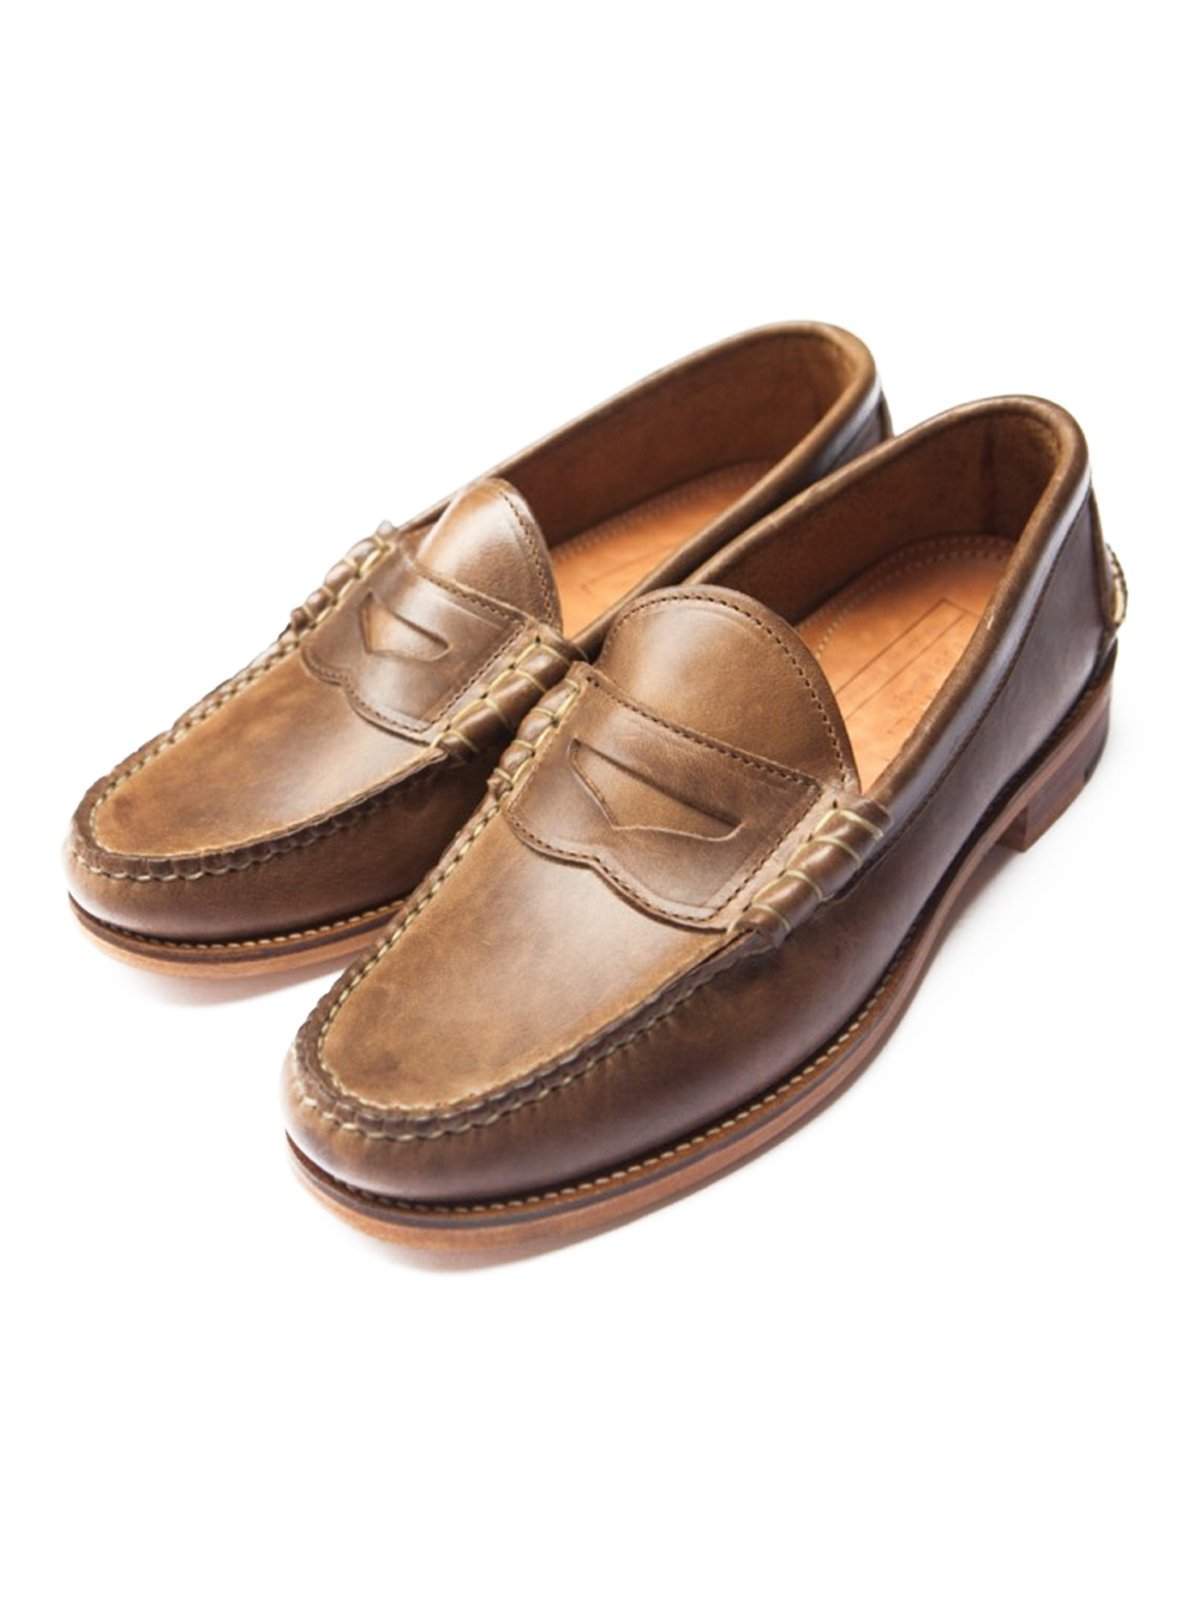 Oakstreet Bootmakers Natural Beefroll Penny Loafer - MORE by Morello Indonesia